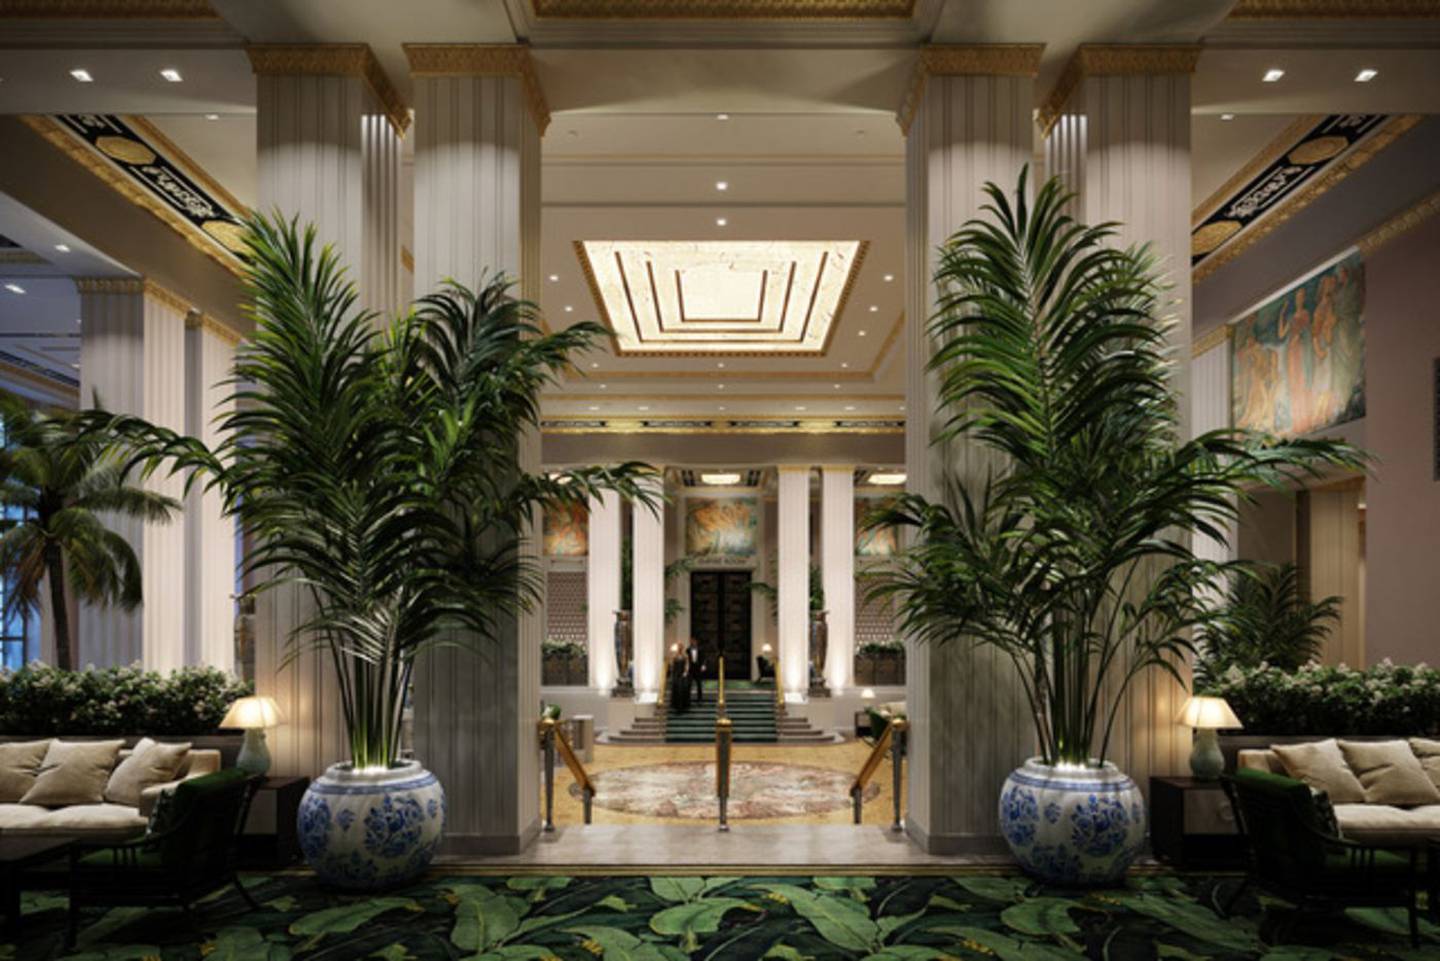 A rendering of the Park Avenue lobby. (Photo: The Waldorf Astoria)dfd